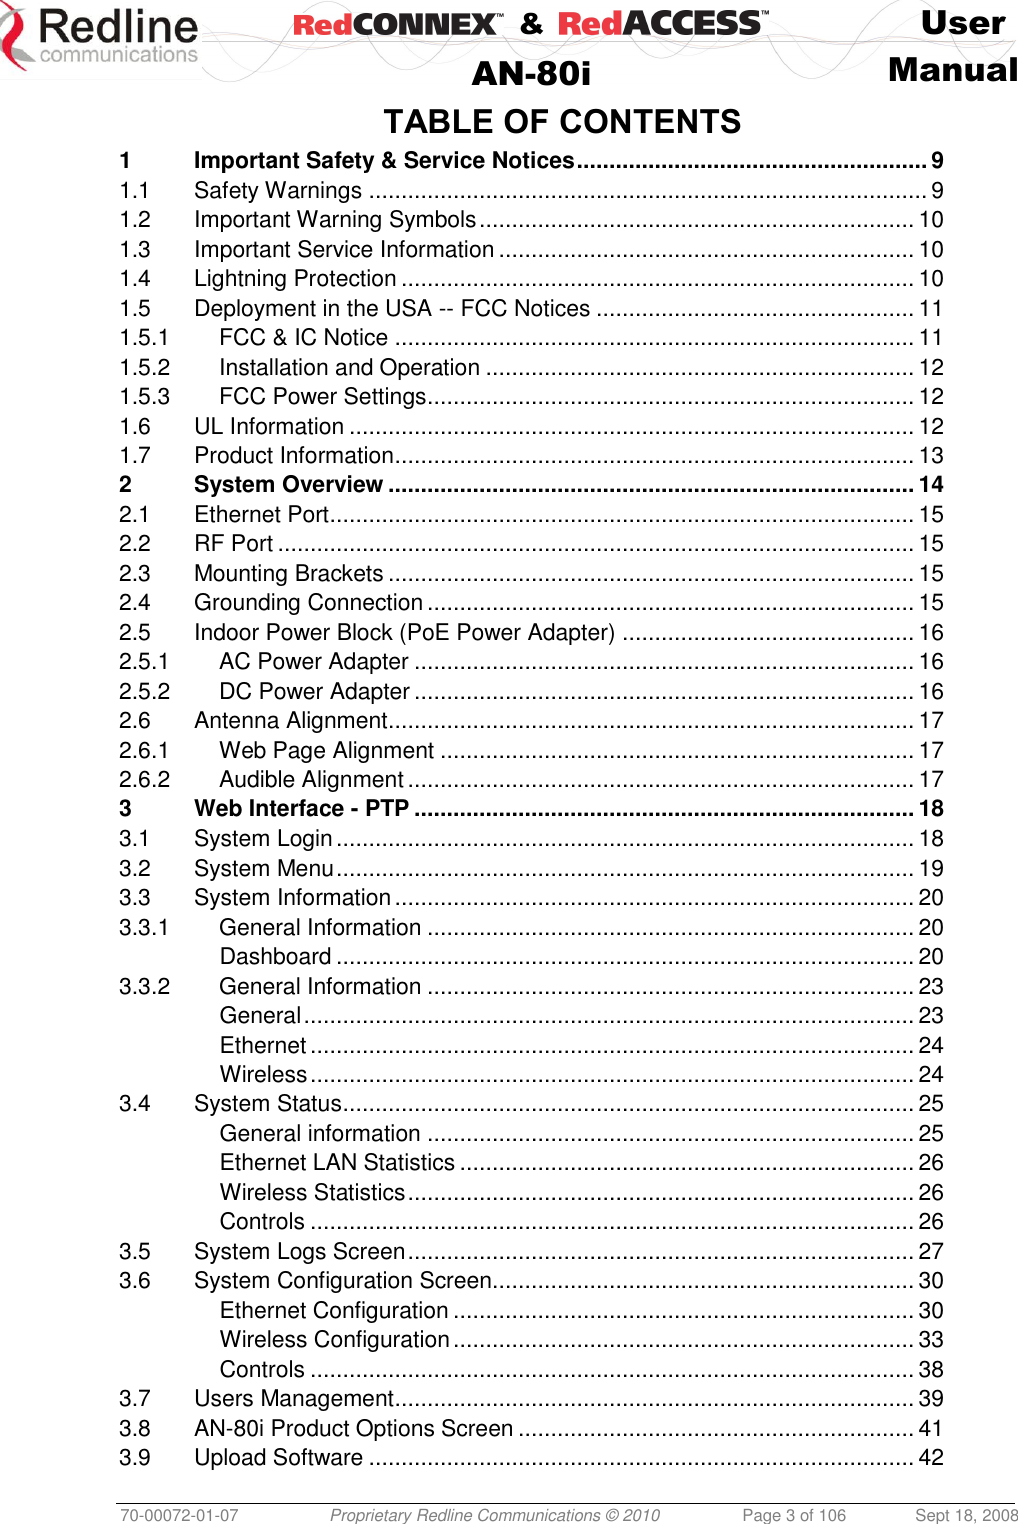    &amp;  User  AN-80i Manual  70-00072-01-07 Proprietary Redline Communications © 2010  Page 3 of 106  Sept 18, 2008 TABLE OF CONTENTS 1 Important Safety &amp; Service Notices ...................................................... 9 1.1 Safety Warnings ...................................................................................... 9 1.2 Important Warning Symbols ................................................................... 10 1.3 Important Service Information ................................................................ 10 1.4 Lightning Protection ............................................................................... 10 1.5 Deployment in the USA -- FCC Notices ................................................. 11 1.5.1 FCC &amp; IC Notice ................................................................................ 11 1.5.2 Installation and Operation .................................................................. 12 1.5.3 FCC Power Settings ........................................................................... 12 1.6 UL Information ....................................................................................... 12 1.7 Product Information ................................................................................ 13 2 System Overview ................................................................................. 14 2.1 Ethernet Port .......................................................................................... 15 2.2 RF Port .................................................................................................. 15 2.3 Mounting Brackets ................................................................................. 15 2.4 Grounding Connection ........................................................................... 15 2.5 Indoor Power Block (PoE Power Adapter) ............................................. 16 2.5.1 AC Power Adapter ............................................................................. 16 2.5.2 DC Power Adapter ............................................................................. 16 2.6 Antenna Alignment ................................................................................. 17 2.6.1 Web Page Alignment ......................................................................... 17 2.6.2 Audible Alignment .............................................................................. 17 3 Web Interface - PTP ............................................................................. 18 3.1 System Login ......................................................................................... 18 3.2 System Menu ......................................................................................... 19 3.3 System Information ................................................................................ 20 3.3.1 General Information ........................................................................... 20 Dashboard ......................................................................................... 20 3.3.2 General Information ........................................................................... 23 General .............................................................................................. 23 Ethernet ............................................................................................. 24 Wireless ............................................................................................. 24 3.4 System Status ........................................................................................ 25 General information ........................................................................... 25 Ethernet LAN Statistics ...................................................................... 26 Wireless Statistics .............................................................................. 26 Controls ............................................................................................. 26 3.5 System Logs Screen .............................................................................. 27 3.6 System Configuration Screen................................................................. 30 Ethernet Configuration ....................................................................... 30 Wireless Configuration ....................................................................... 33 Controls ............................................................................................. 38 3.7 Users Management ................................................................................ 39 3.8 AN-80i Product Options Screen ............................................................. 41 3.9 Upload Software .................................................................................... 42 